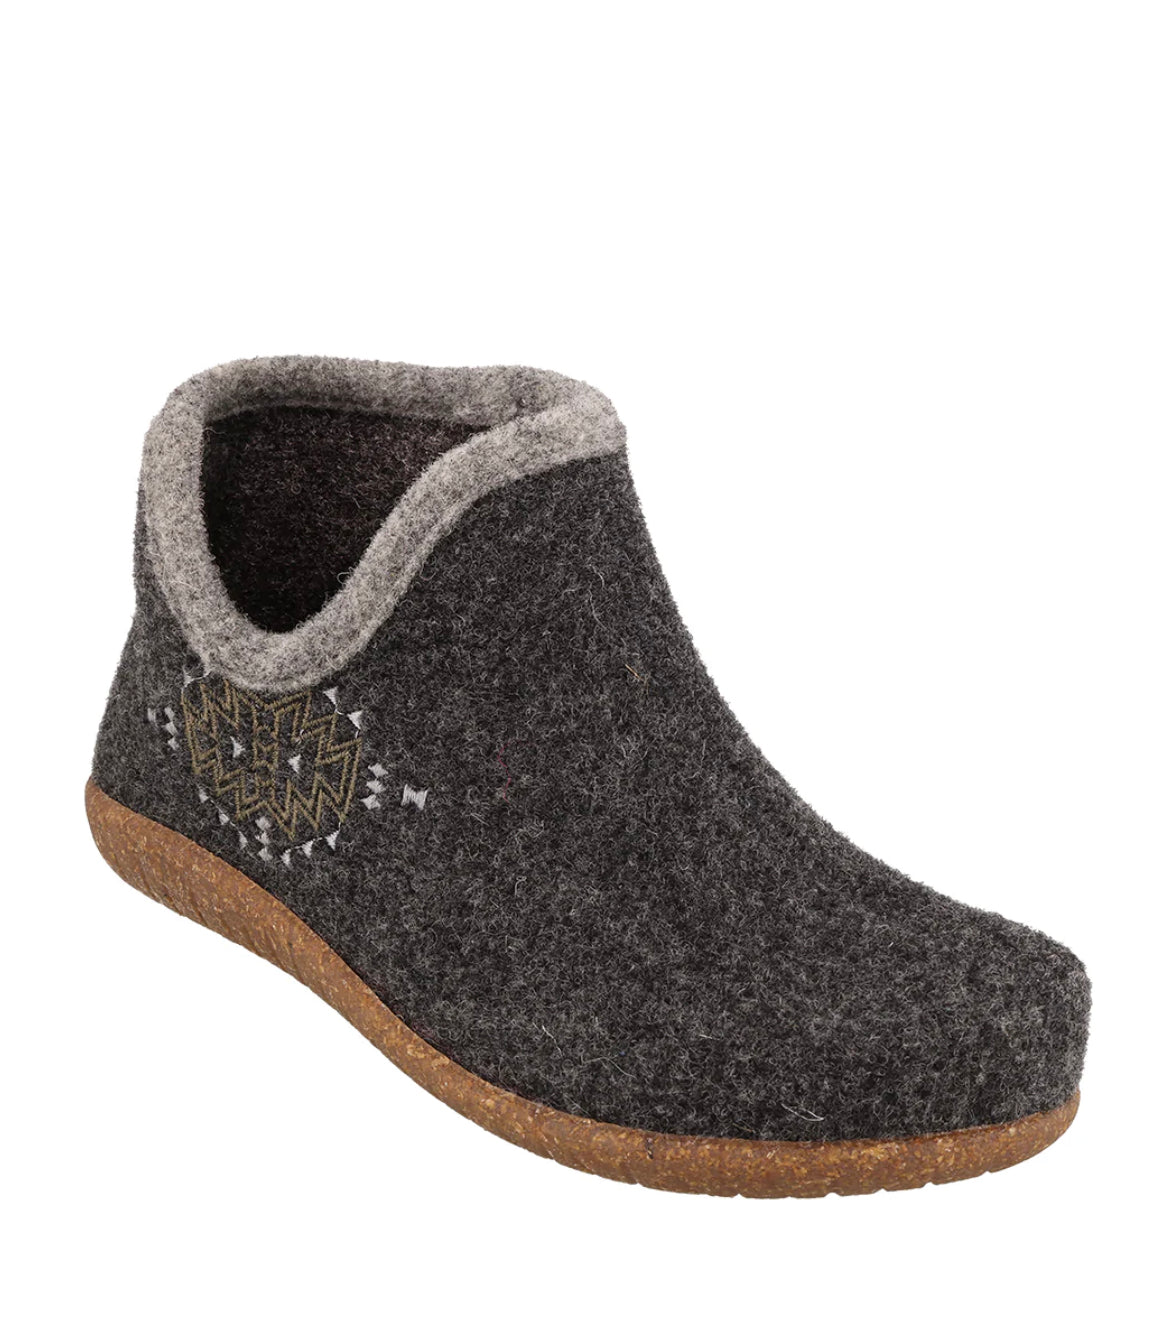 Taos Woolside Charcoal Shoe - All Mixed Up 